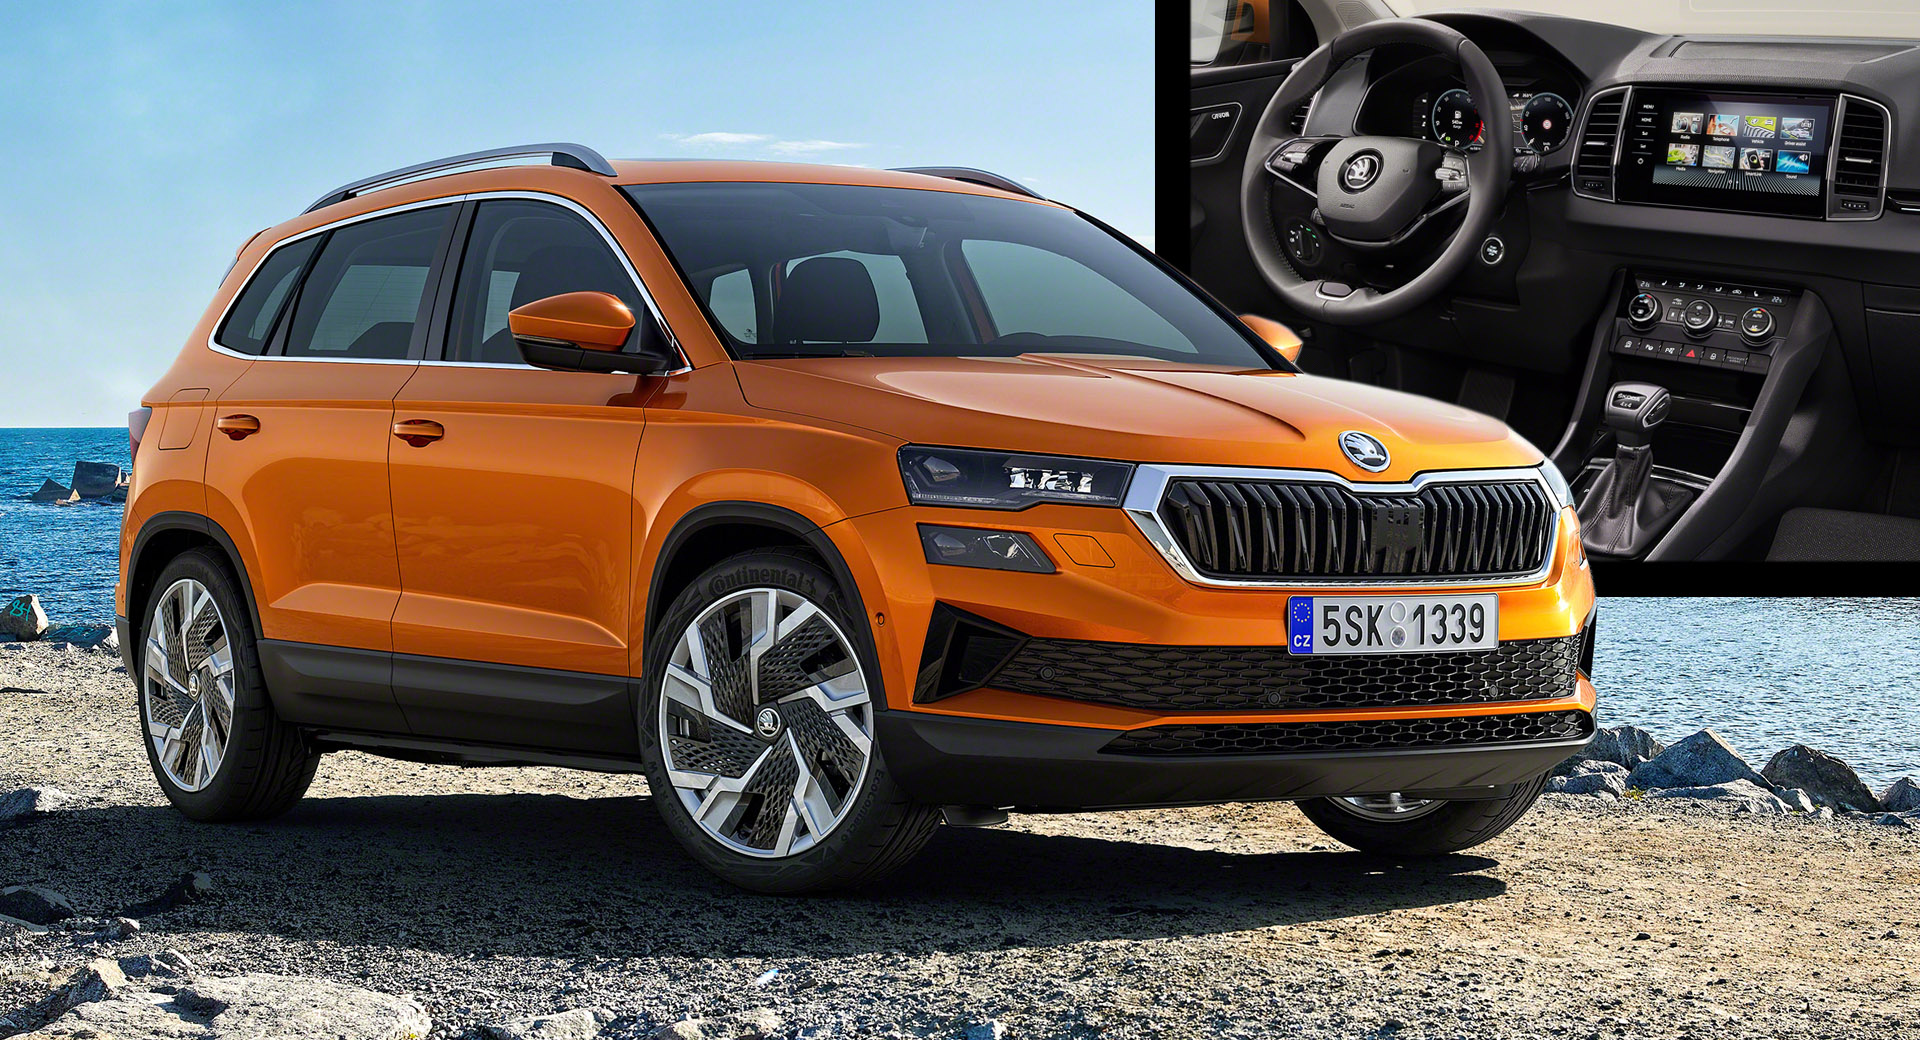 2022 Skoda Karoq Gets Freshened Up With Mild Visual Updates And More Tech